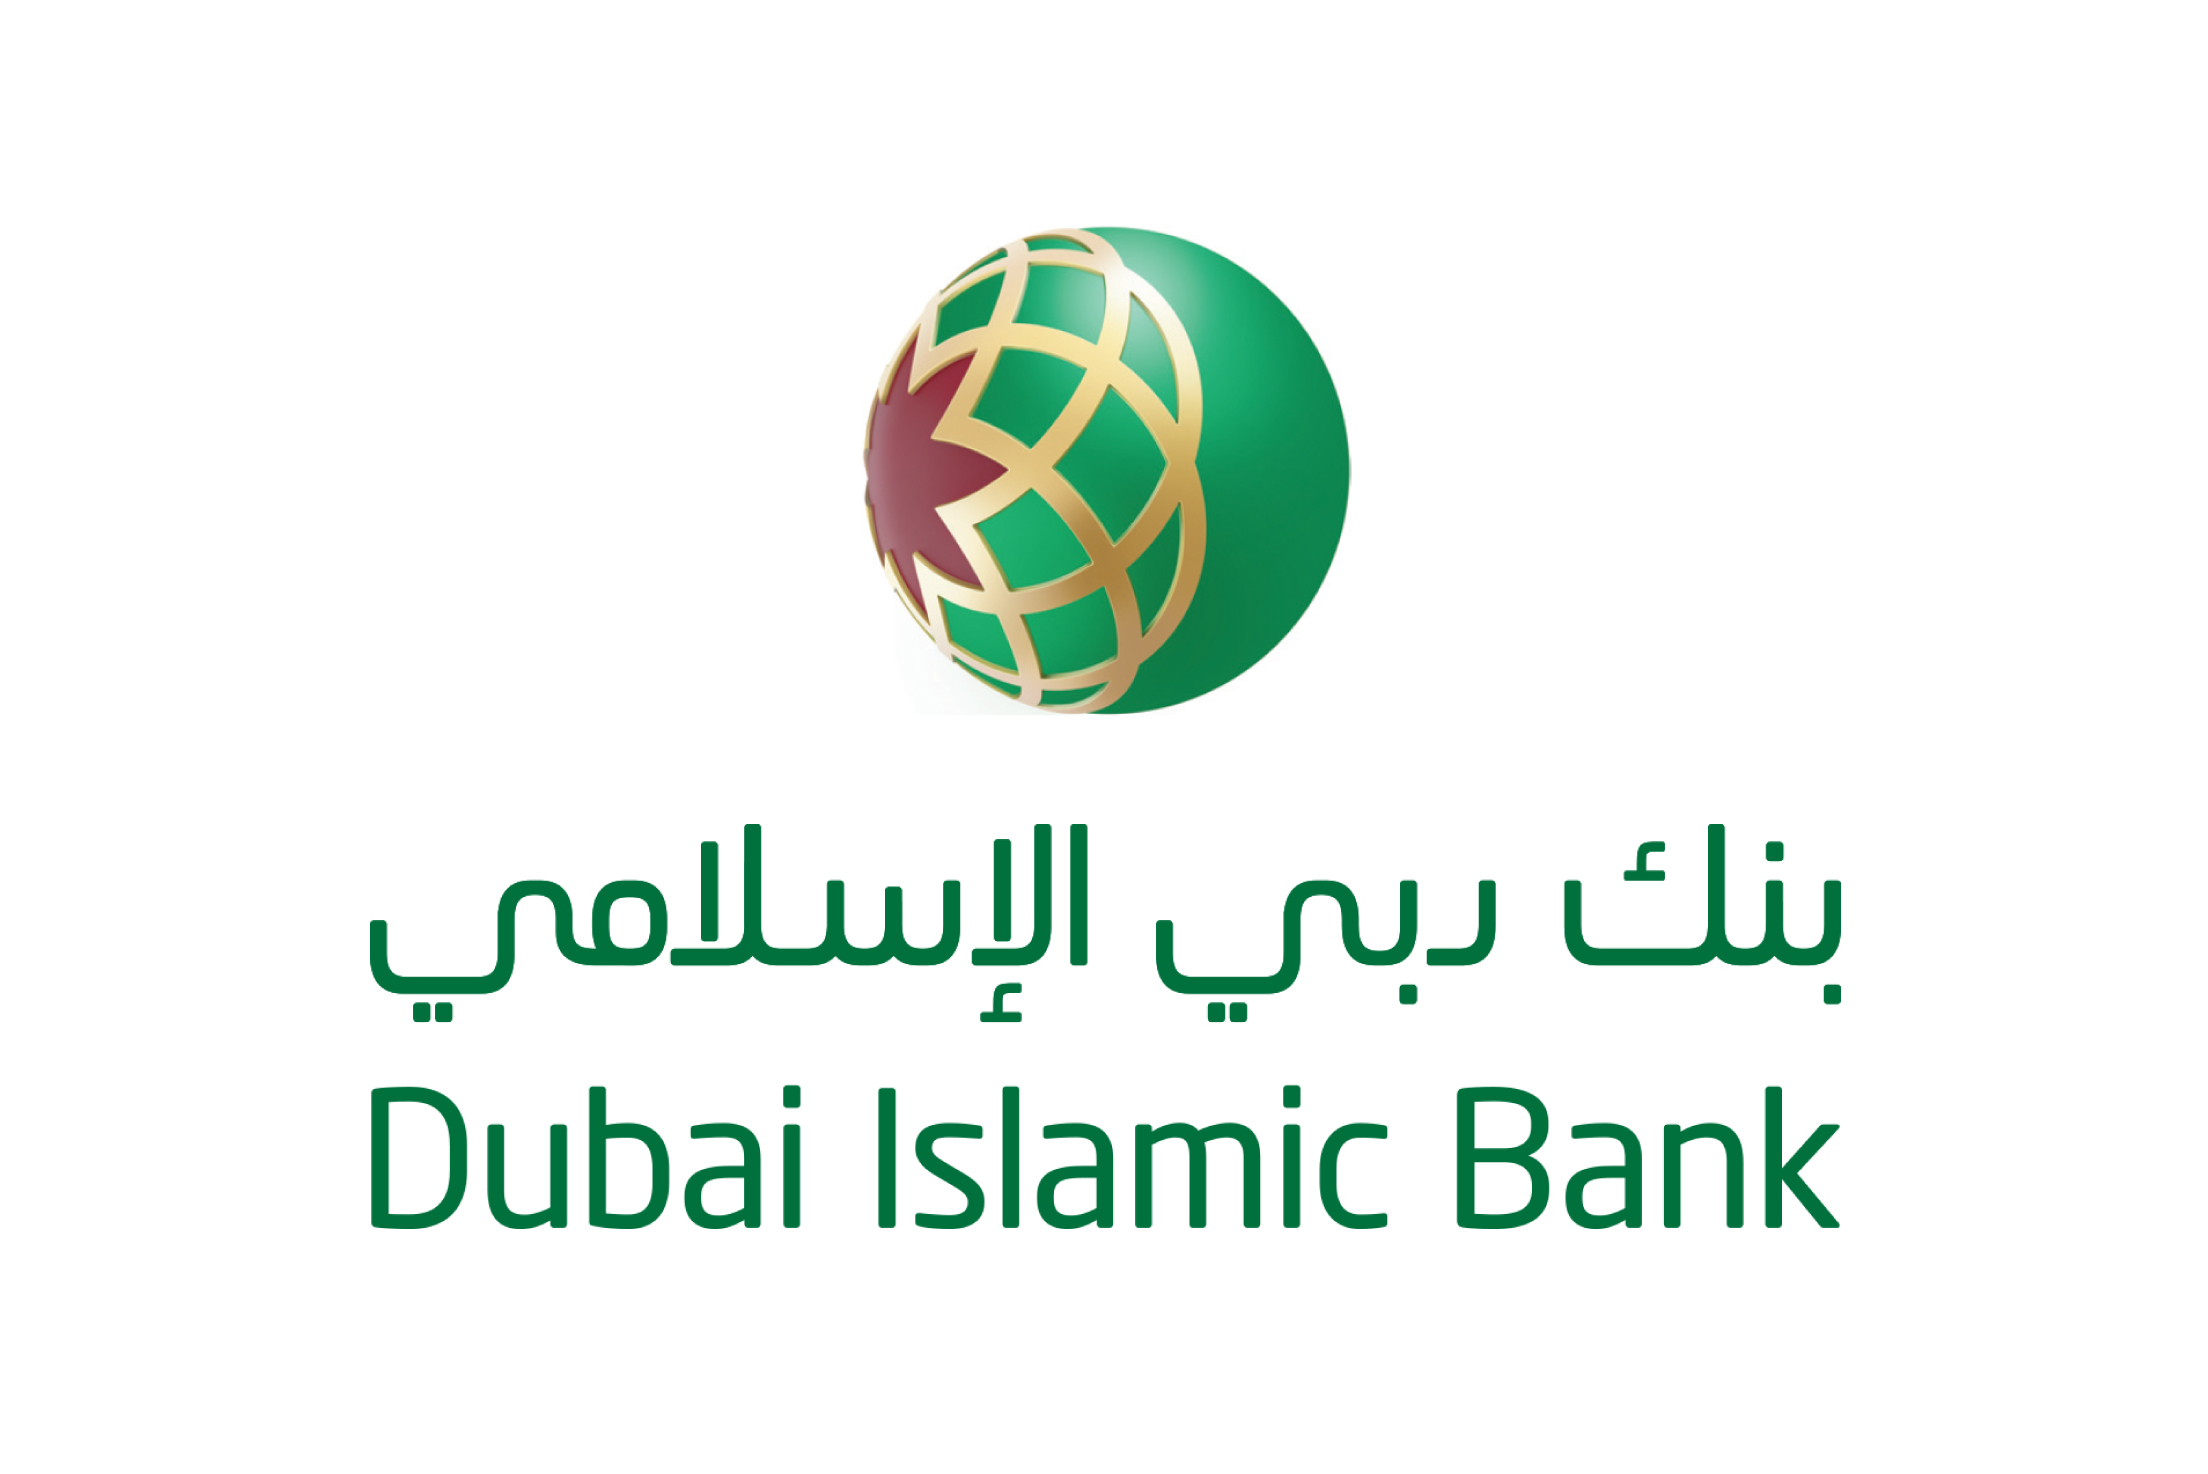 Dubai Islamic Bank donates AED 7 million to Al Jalila Foundation to help patients in need